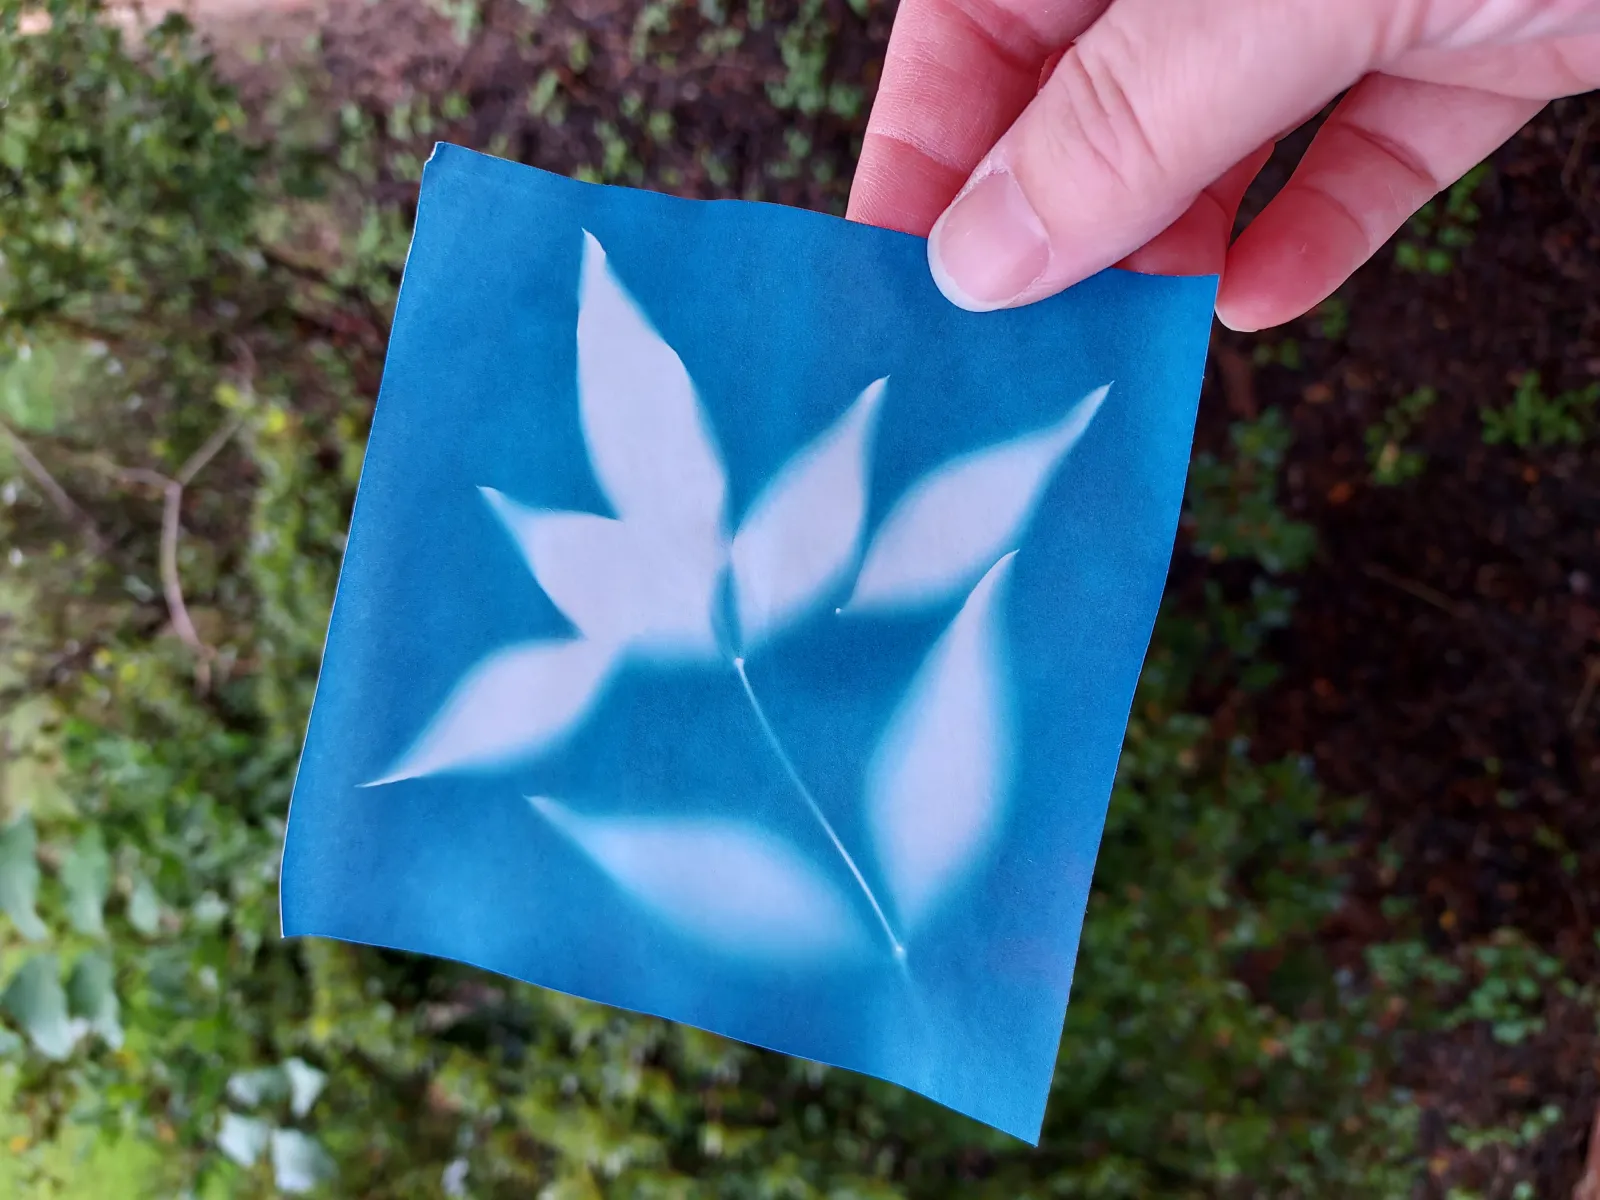 Completed sun print showing a blue background and white image of Nandina leaves.